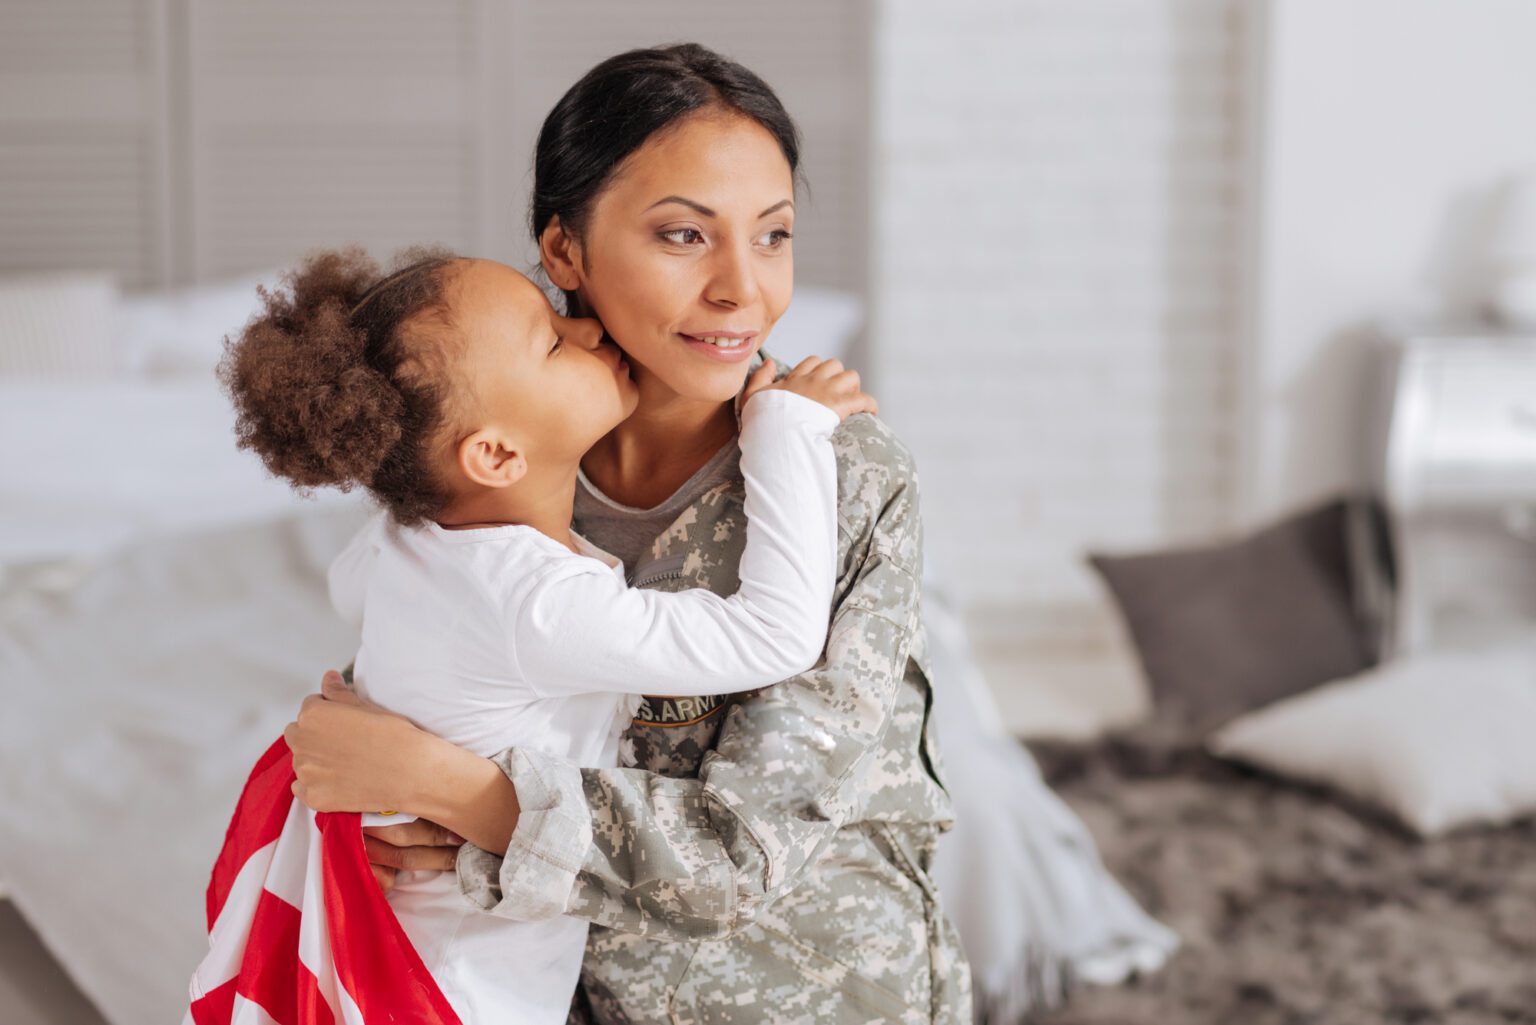 How Arlington Property Management Helps Screen Military Renters